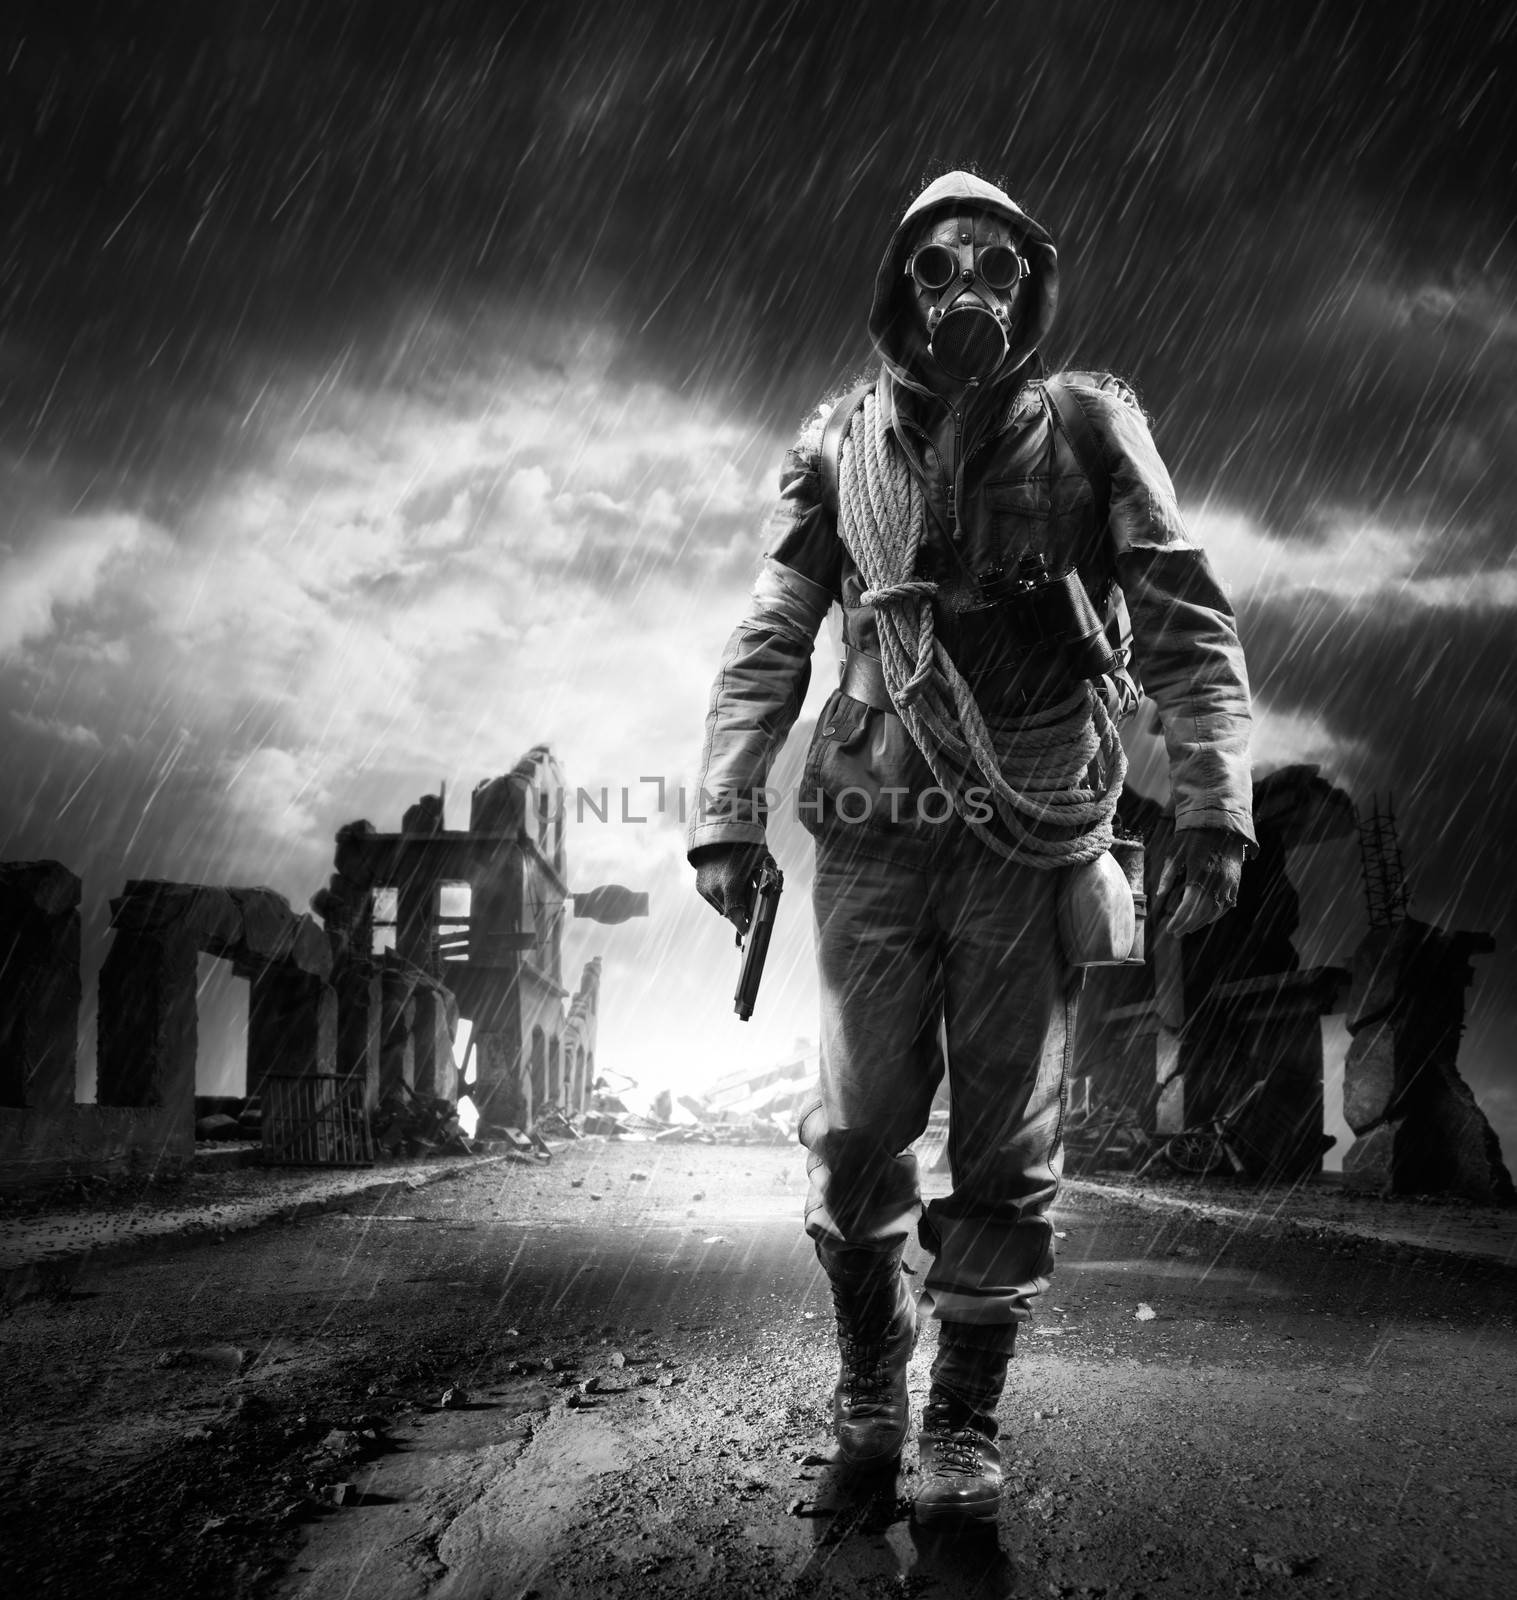 A lonely hero wearing gas mask walking through a city destroyed 